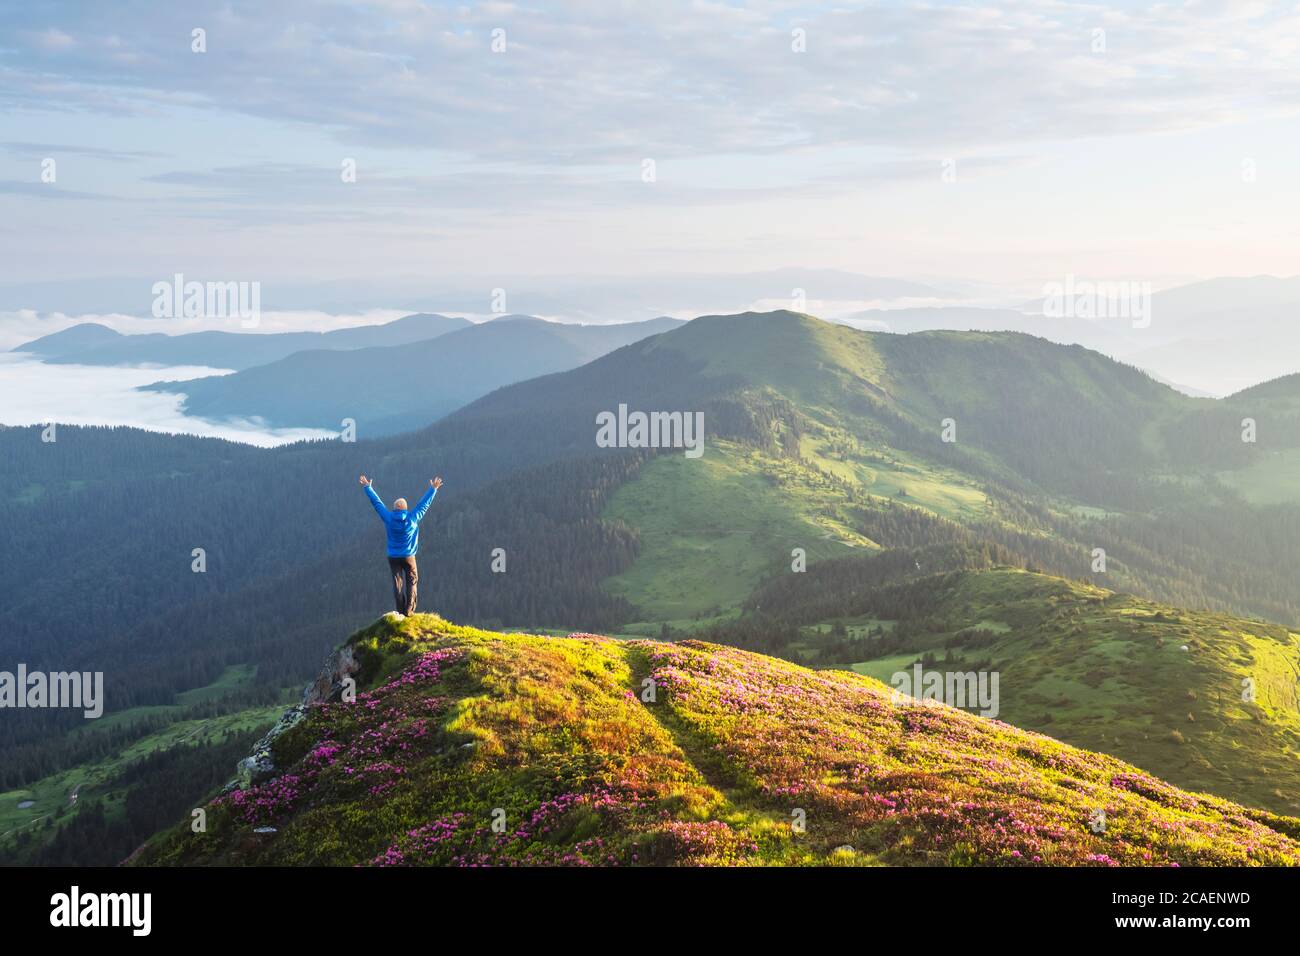 A tourist with raised arms stands on the edge of a cliff covered with a pink carpet of rhododendron flowers. Foggy mountains in the background. Landscape photography Stock Photo